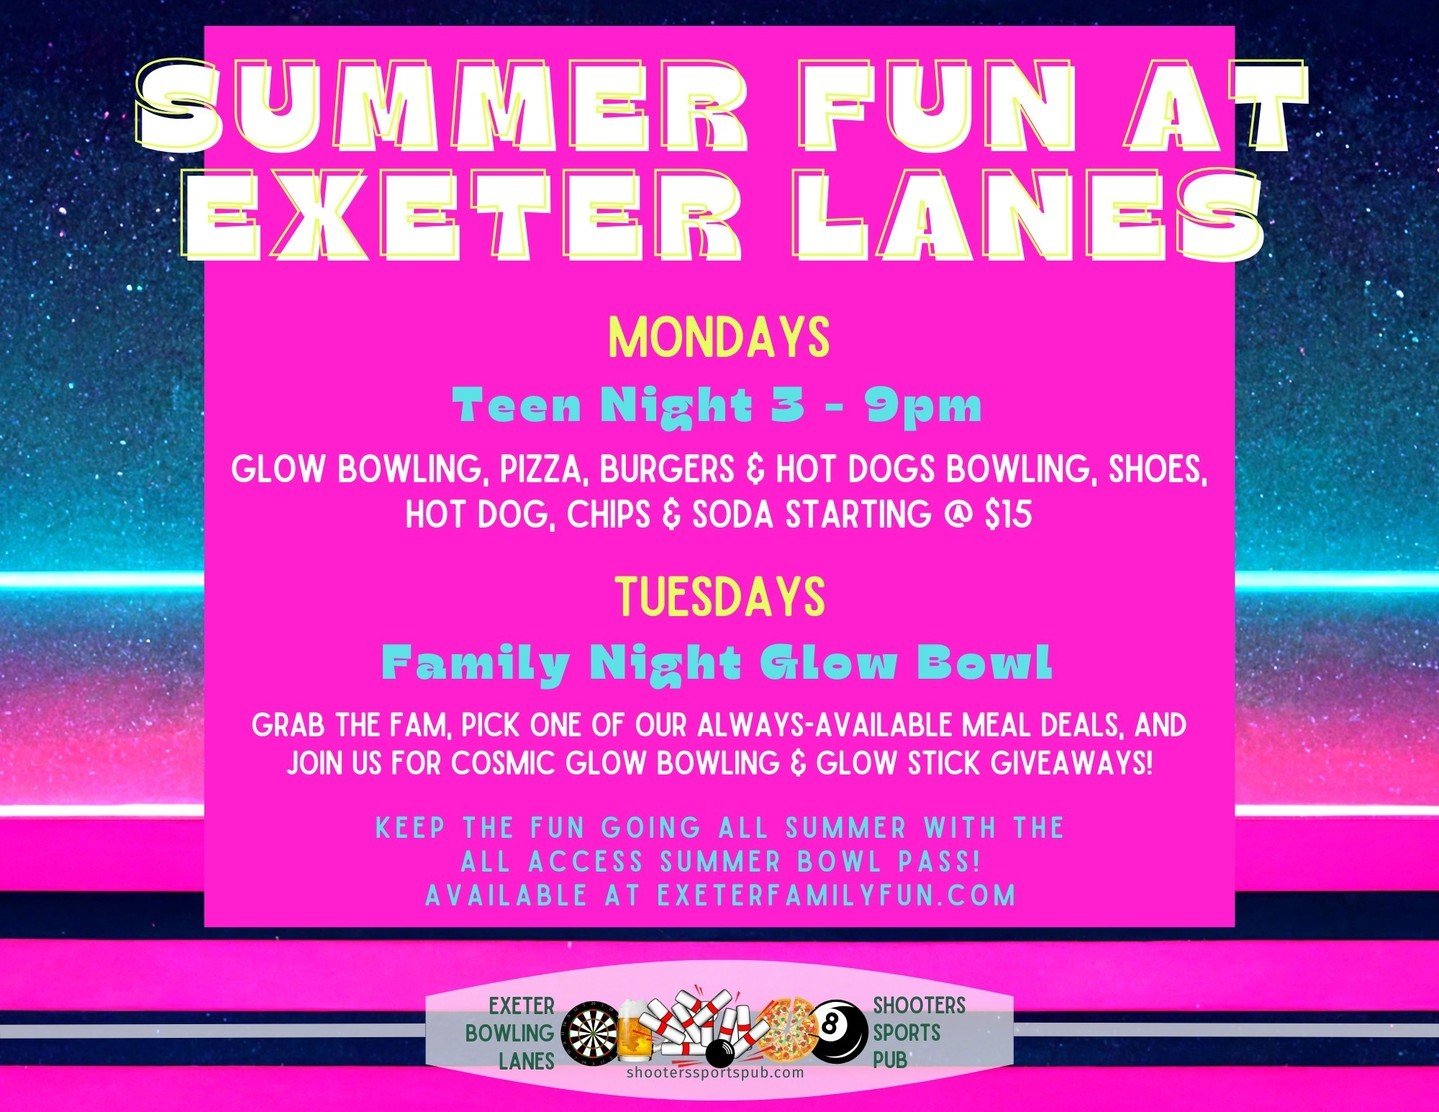 Summer's heating up with cool lanes! 🌞🎳 Teen nights, family fun times, and don't forget&mdash;unlimited summer bowl passes are still up for grabs at exeterfamilyfun.com!